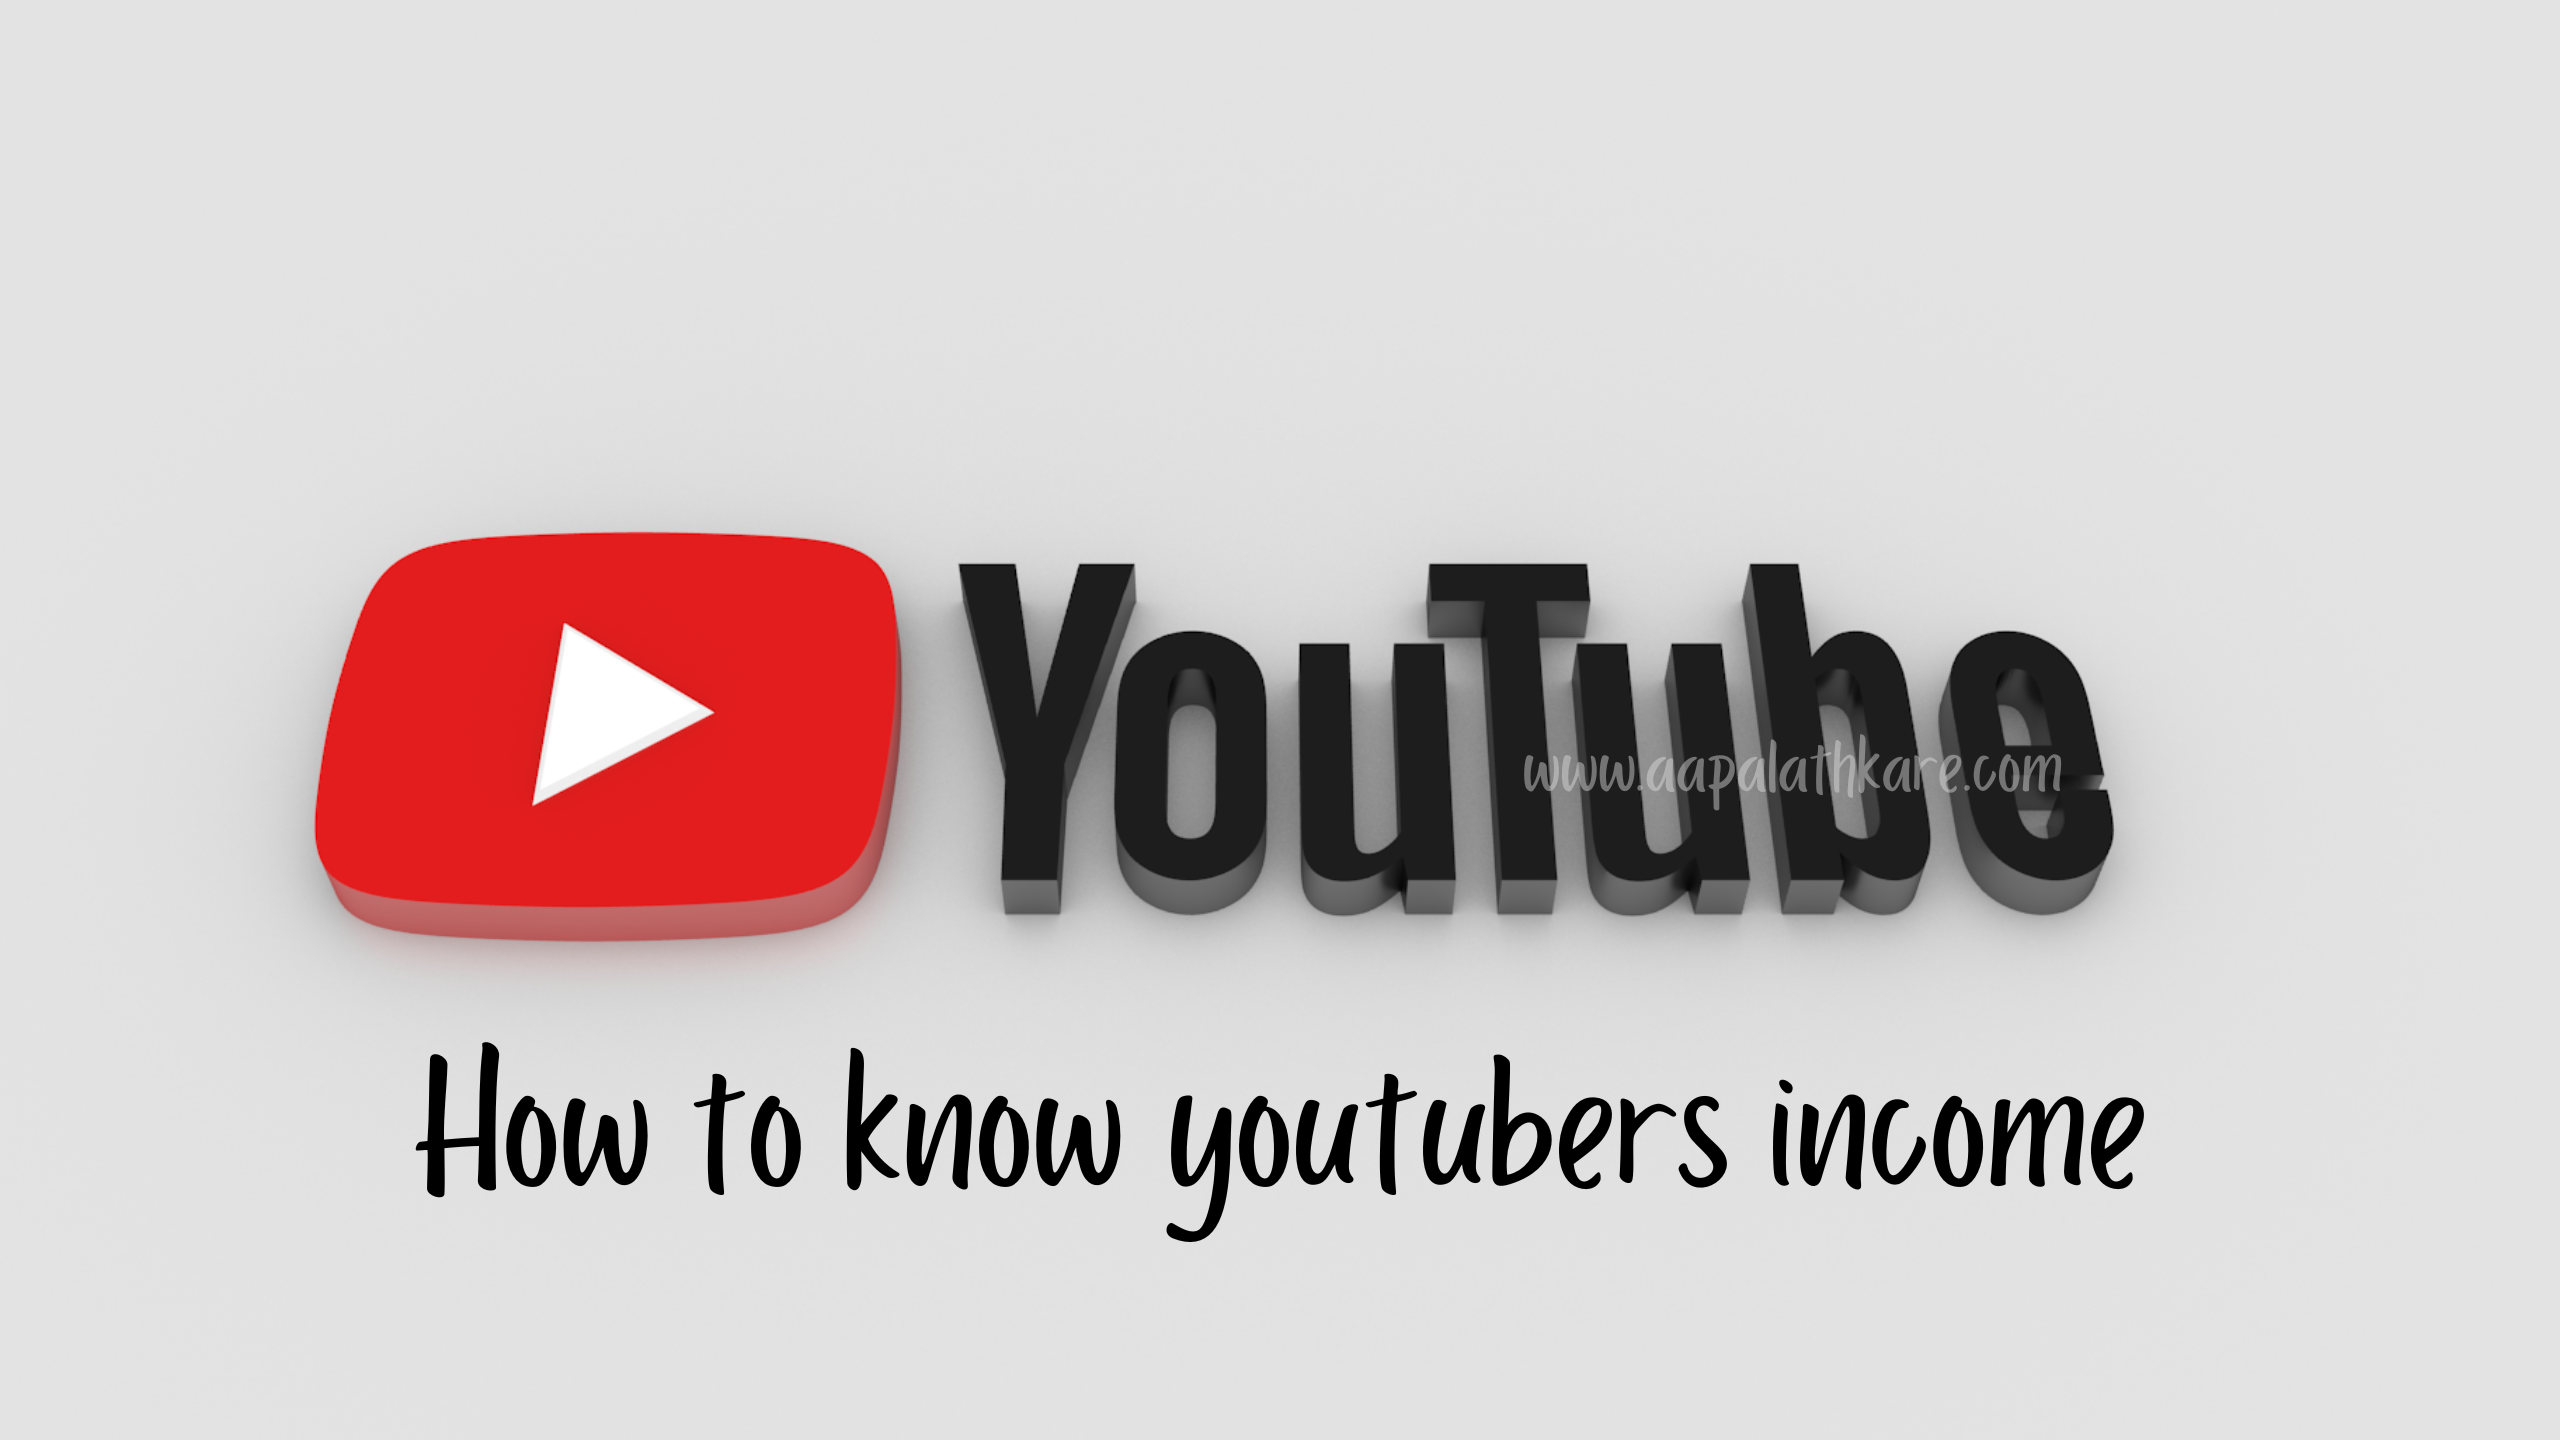 how to know youtubers income,how to know youtubers income website,how to check youtubers income in india,how to check youtubers monthly income,how to check any youtuber income,how to know income of a youtube channel,how to know youtubers income website,how to know income in youtube,website that shows youtubers income,how to check youtubers income in india